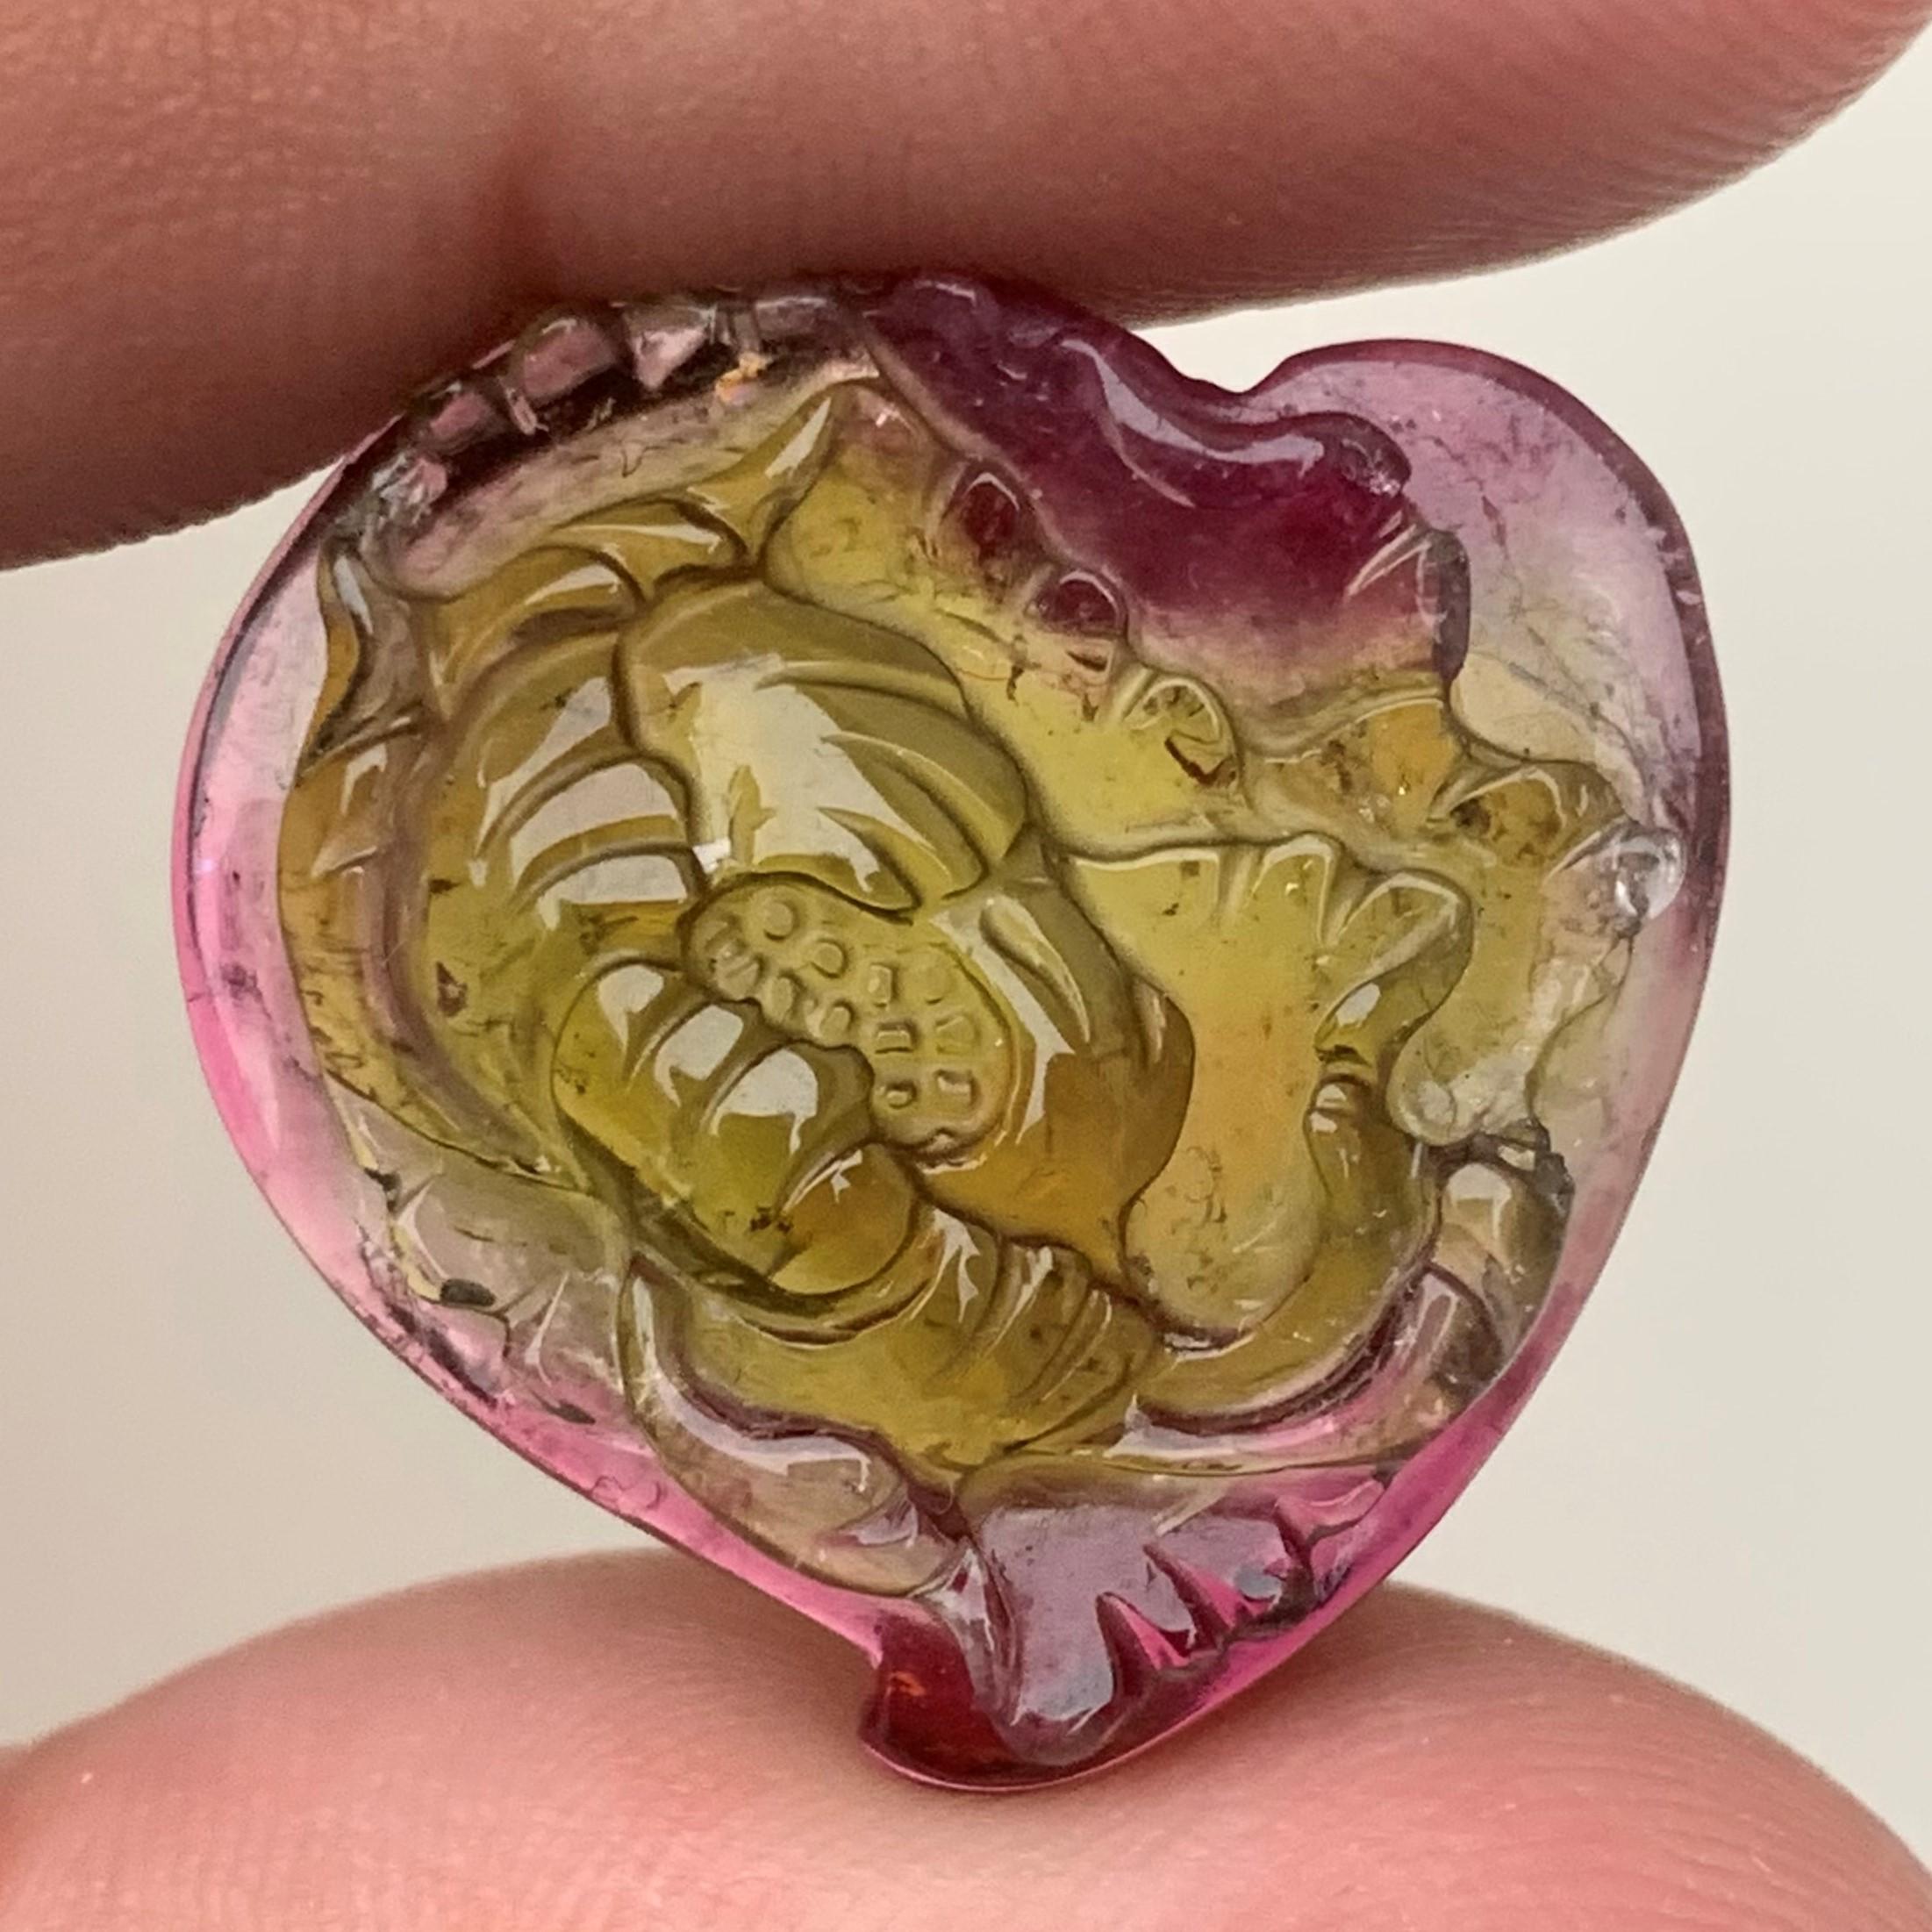 Bicolor Tourmaline Carved
Weight: 35.80 Carats
Dimension: 24x24x8.1 Mm
Origin: Afghanistan
Color: Green & Pink
Shape: Heart Shape Carved
Quality: AAA
.
Bicolor tourmaline is connected to the heart chakra, which makes it good for cleansing and